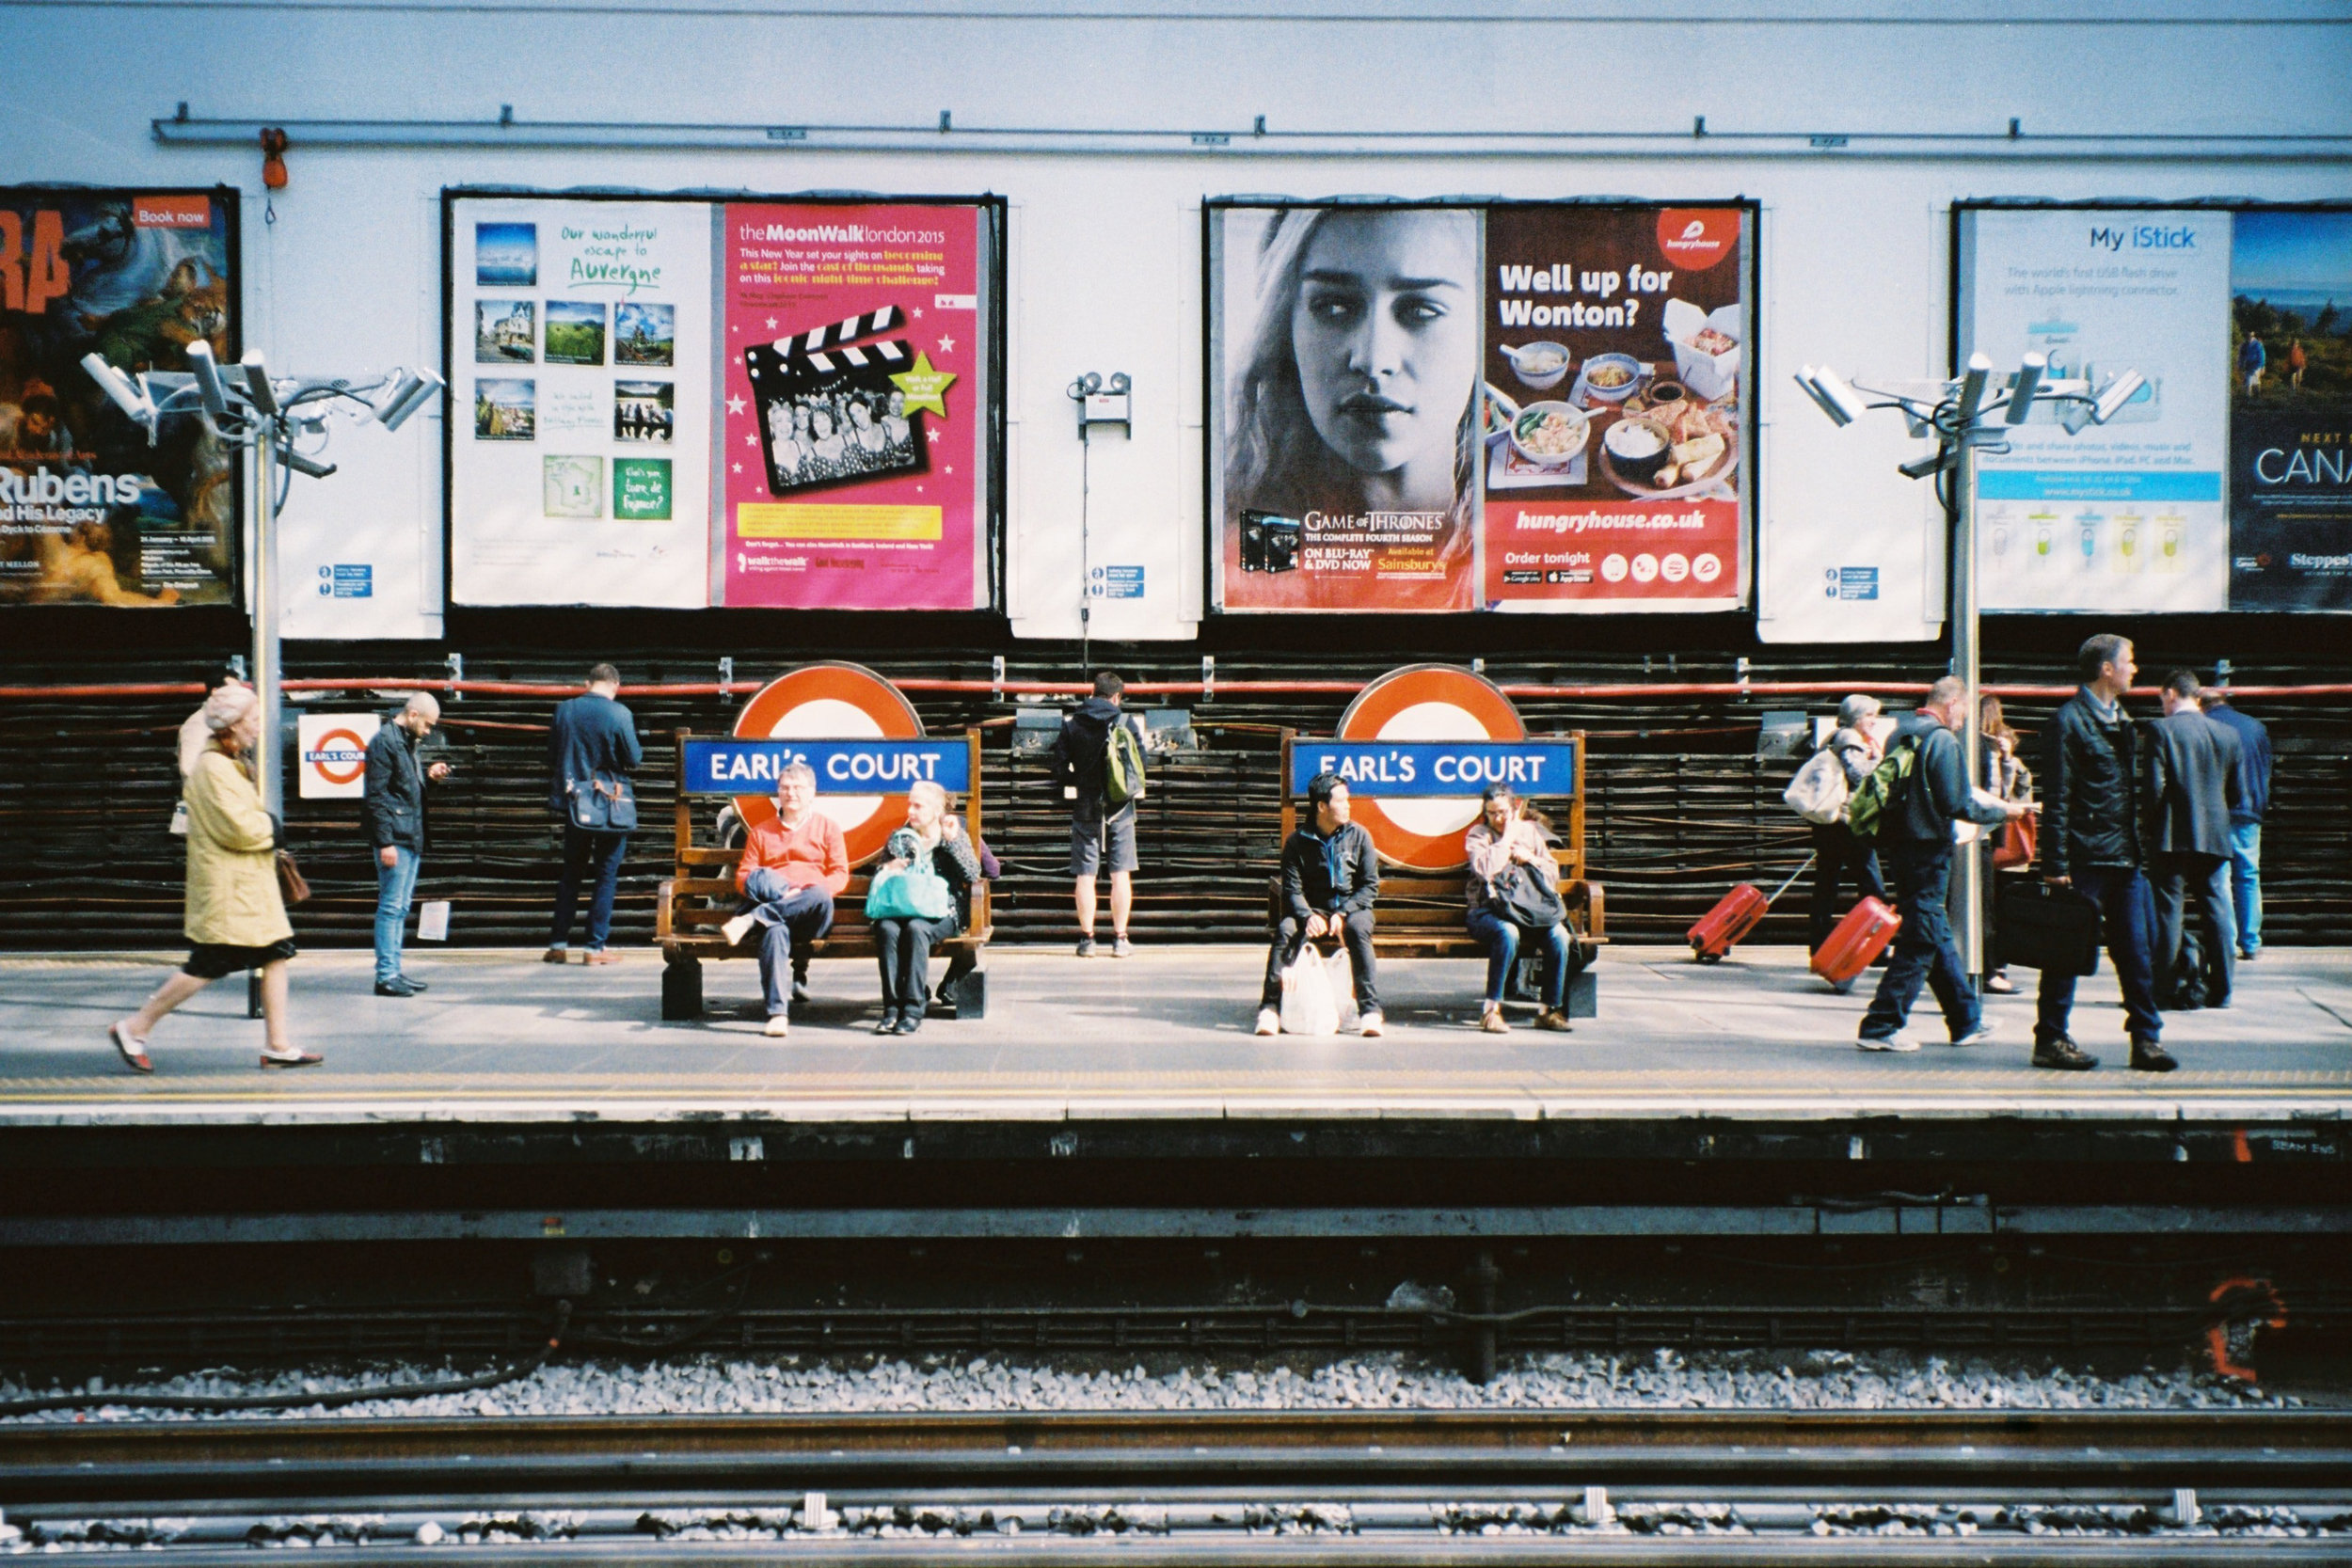 Earl's Court Station, London, The United Kingdom | 2015